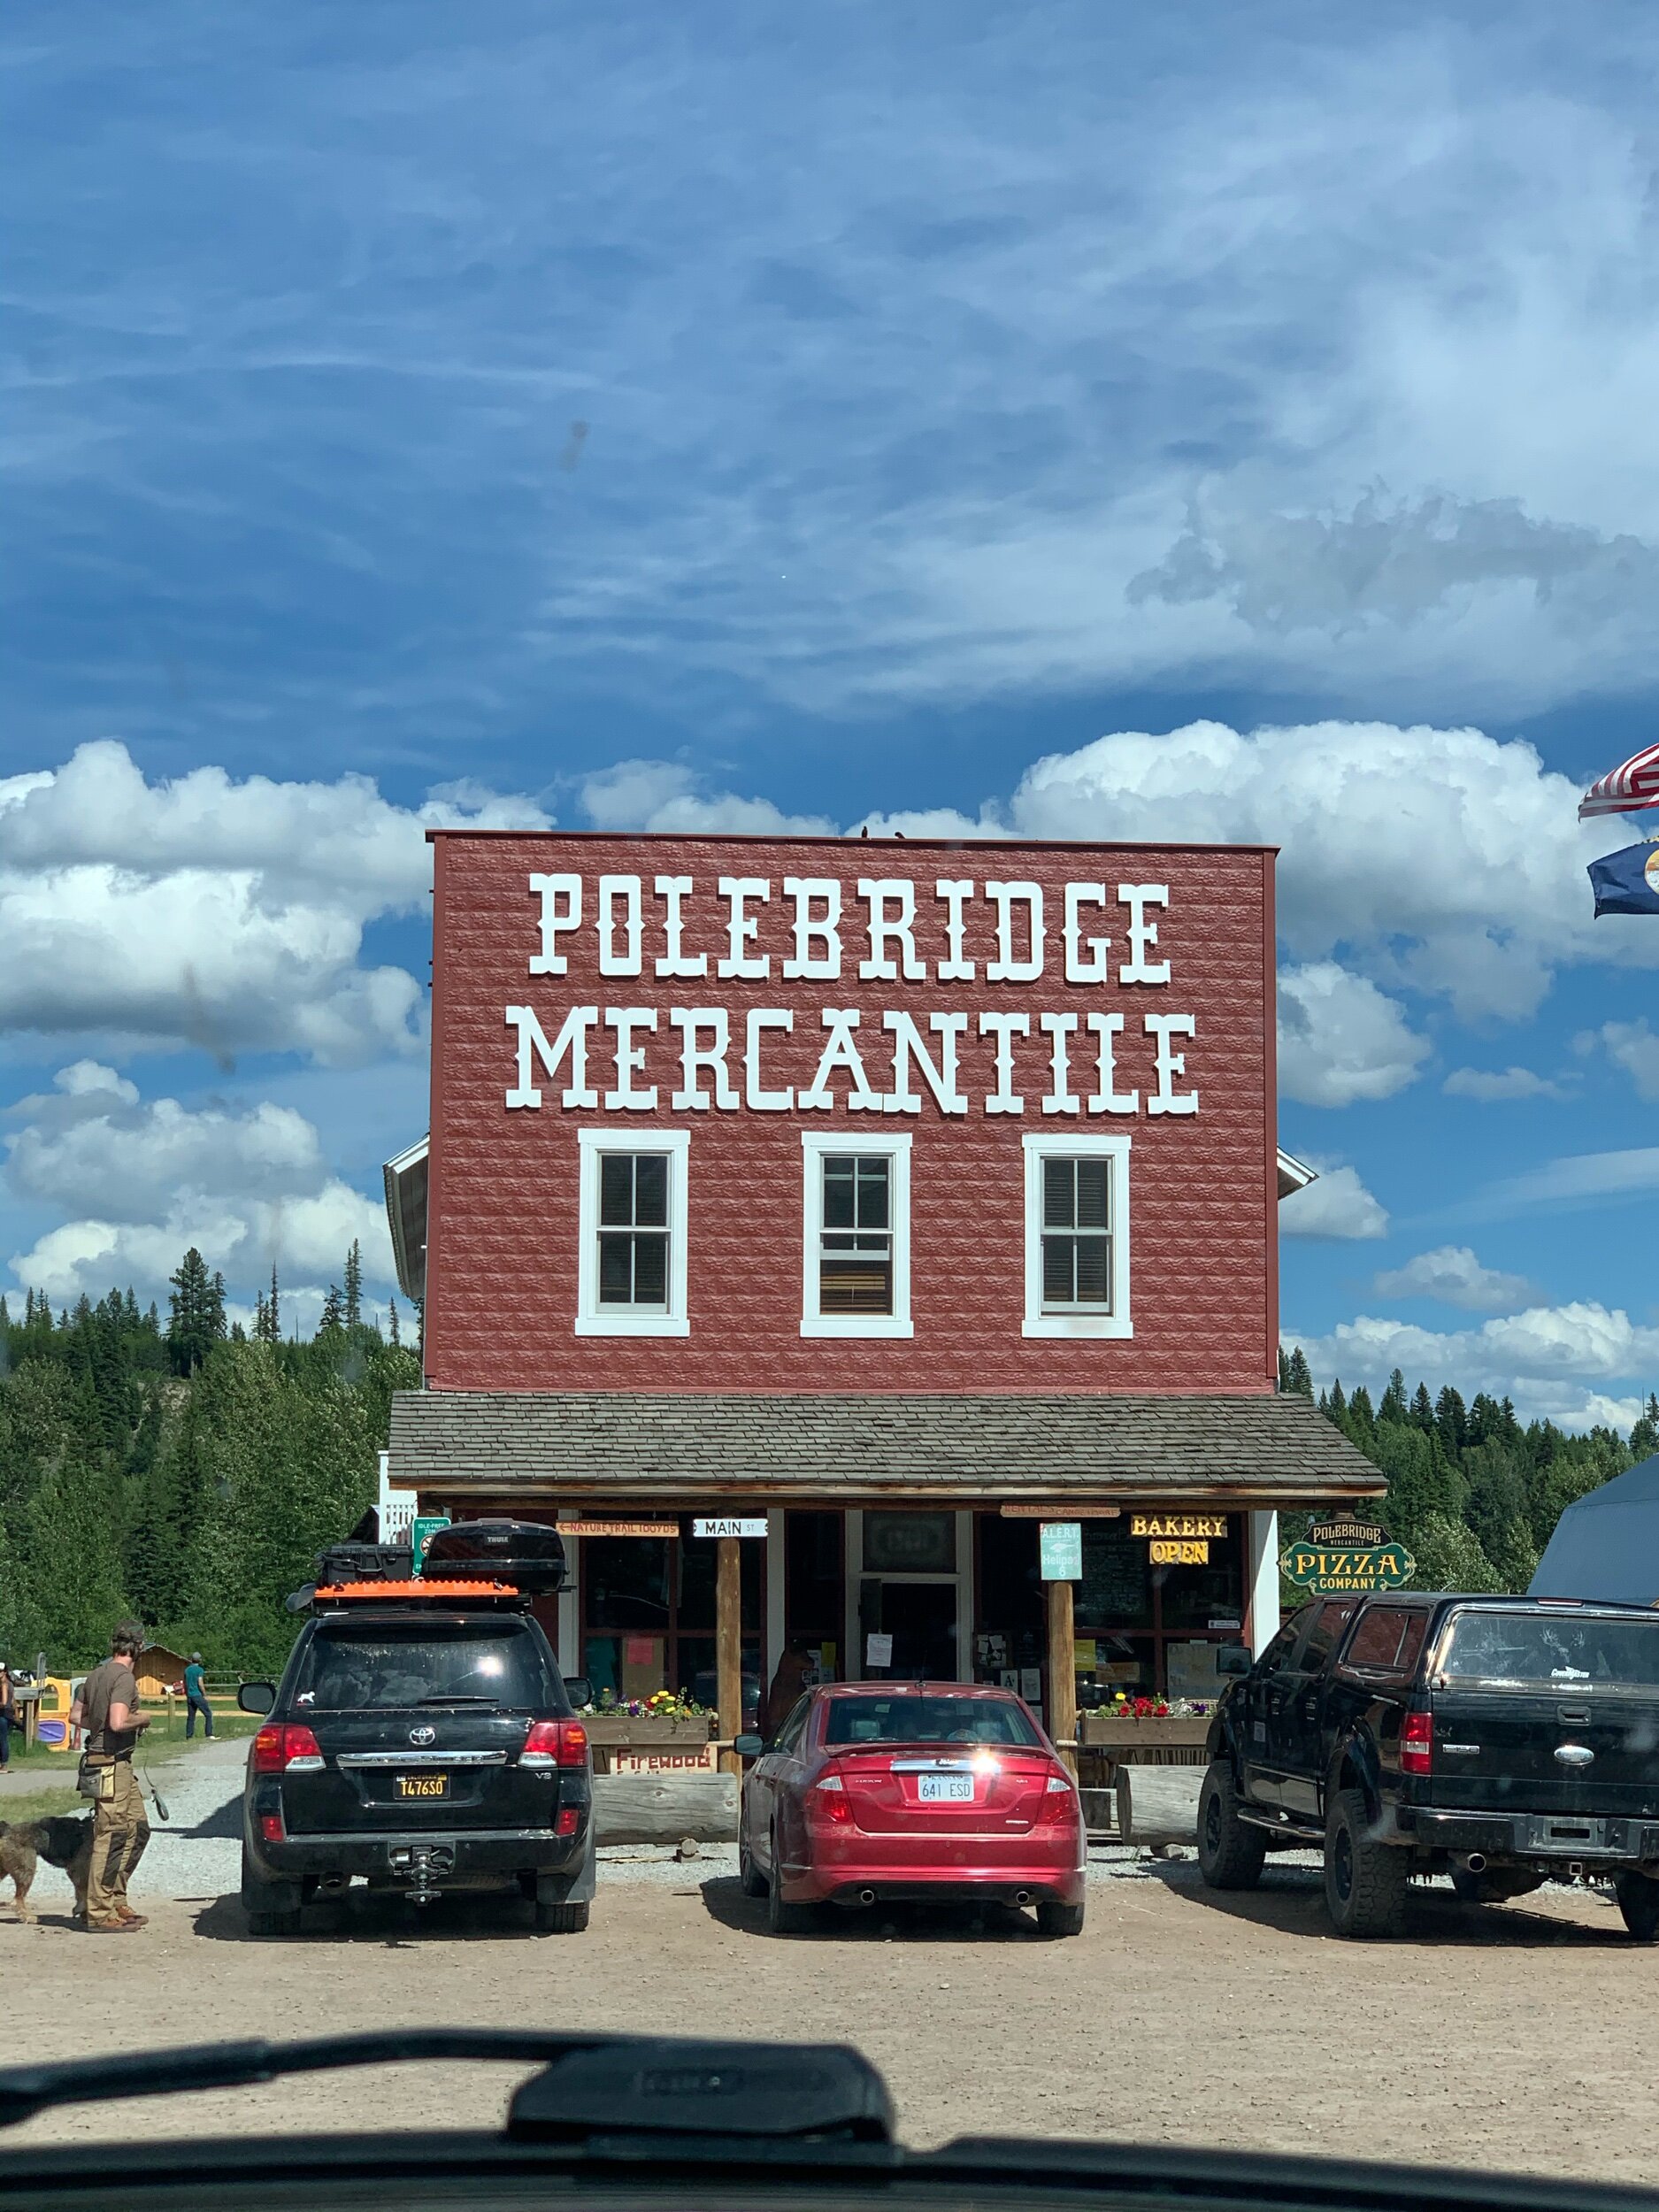  Twenty-two miles south of the Canadian border, is  Polebridge . It’s only public establishments are a saloon next door and this mercantile store, which has been in full operation since 1914. With less than 10 full-time residents, one source said peo